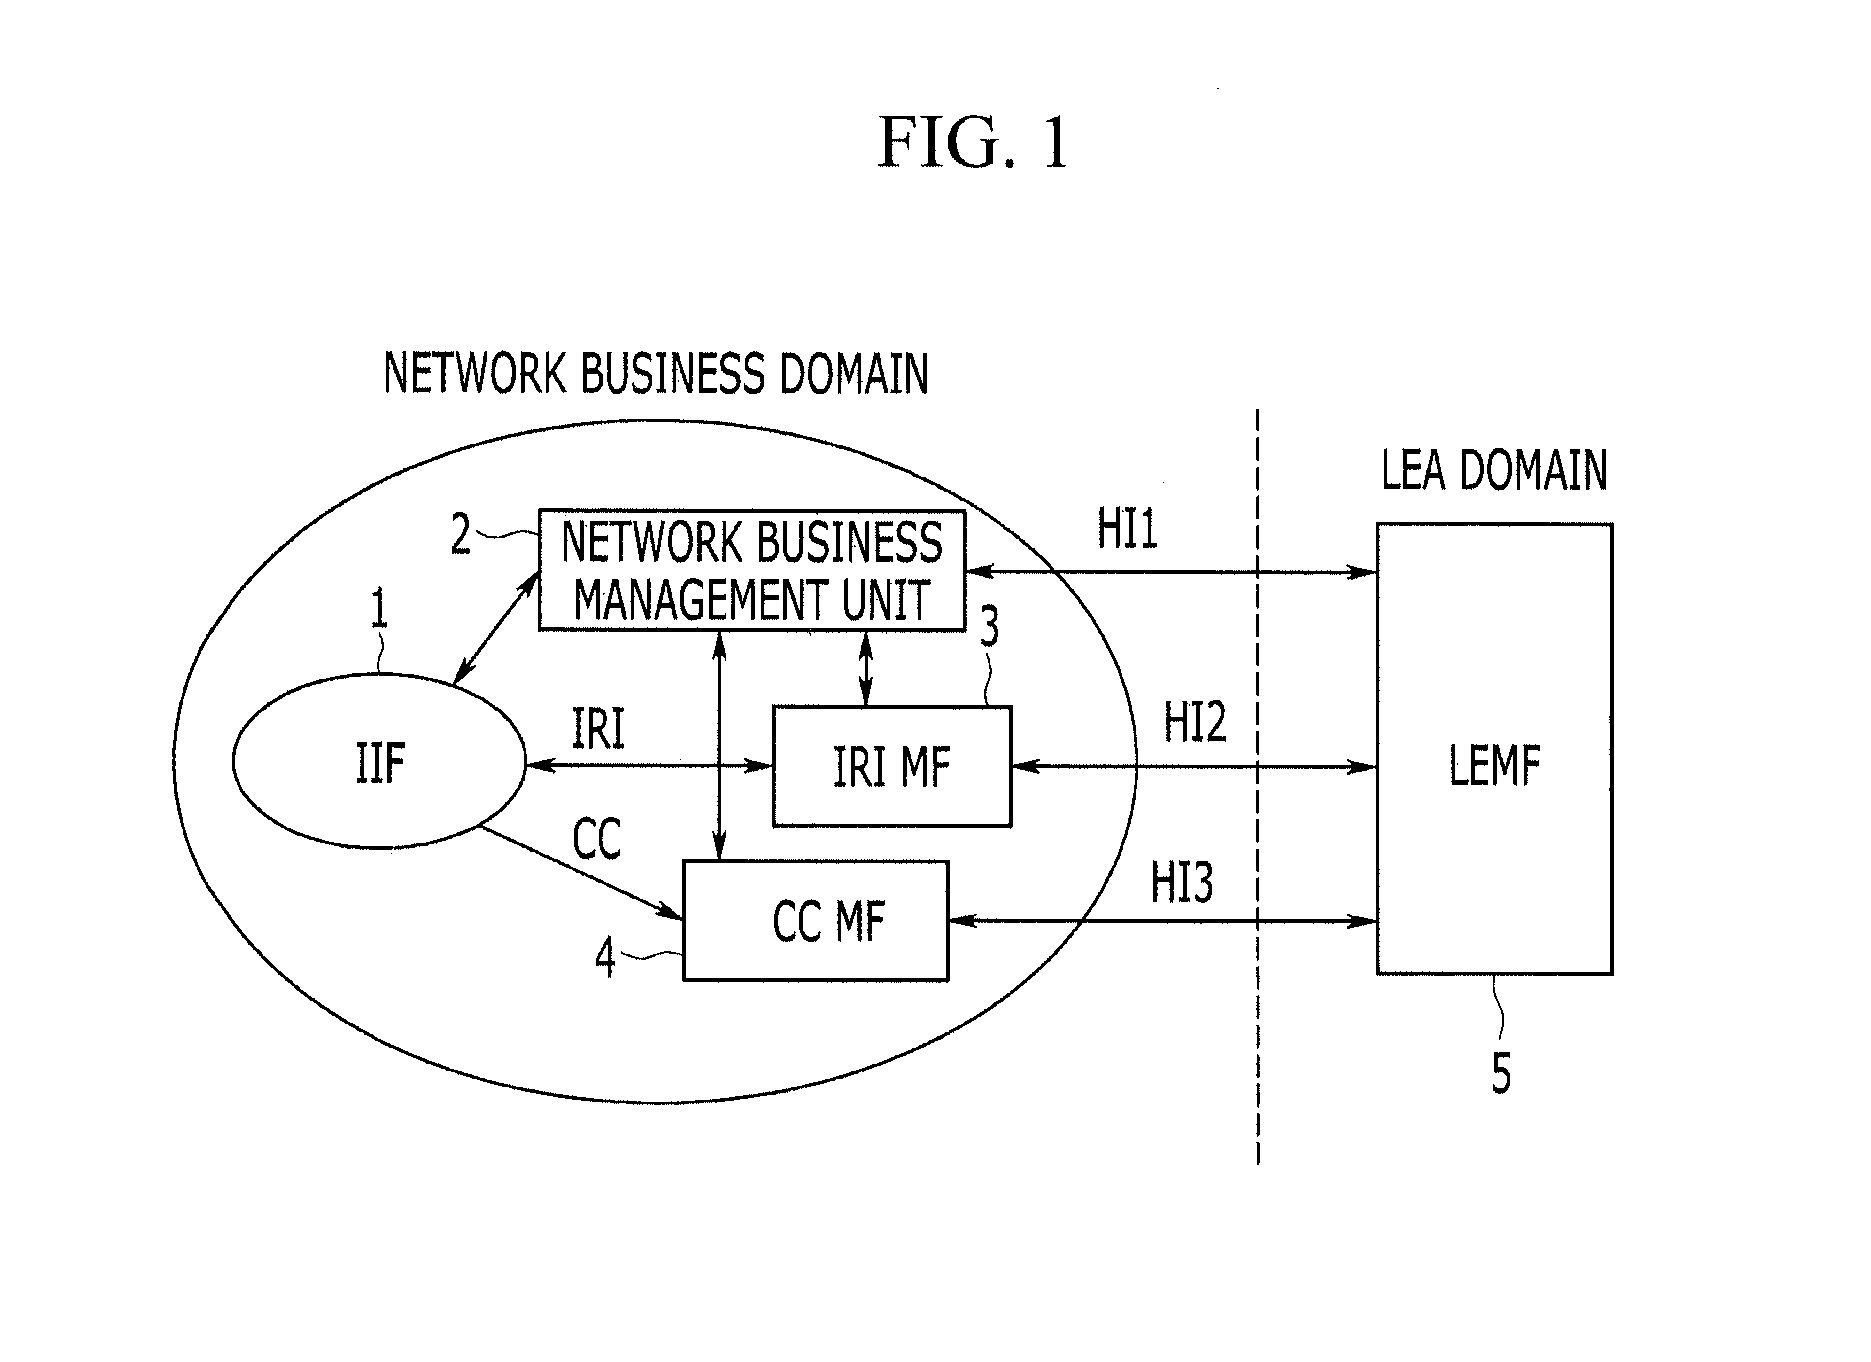 Apparatus and method for lawful interception